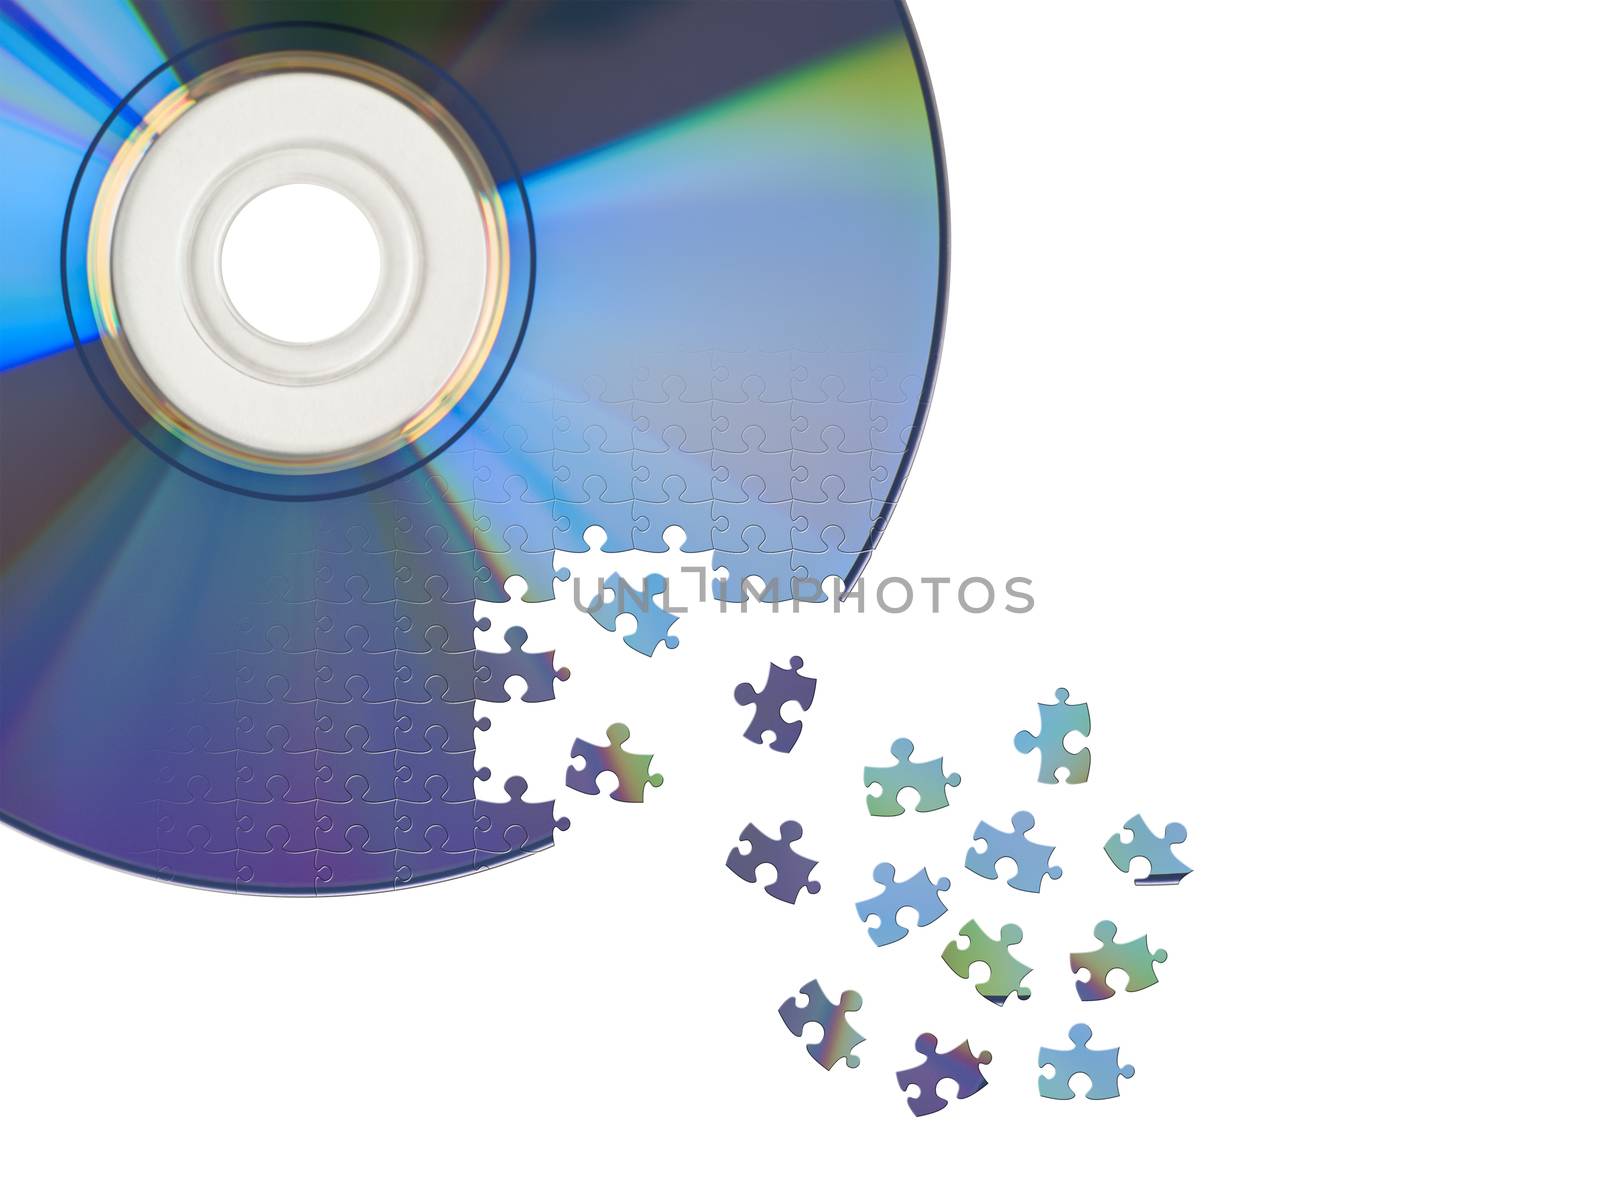 CD / DVD cut by jigsaw puzzle. Concept of data manipulation, archiving, security, encryption or decryption.